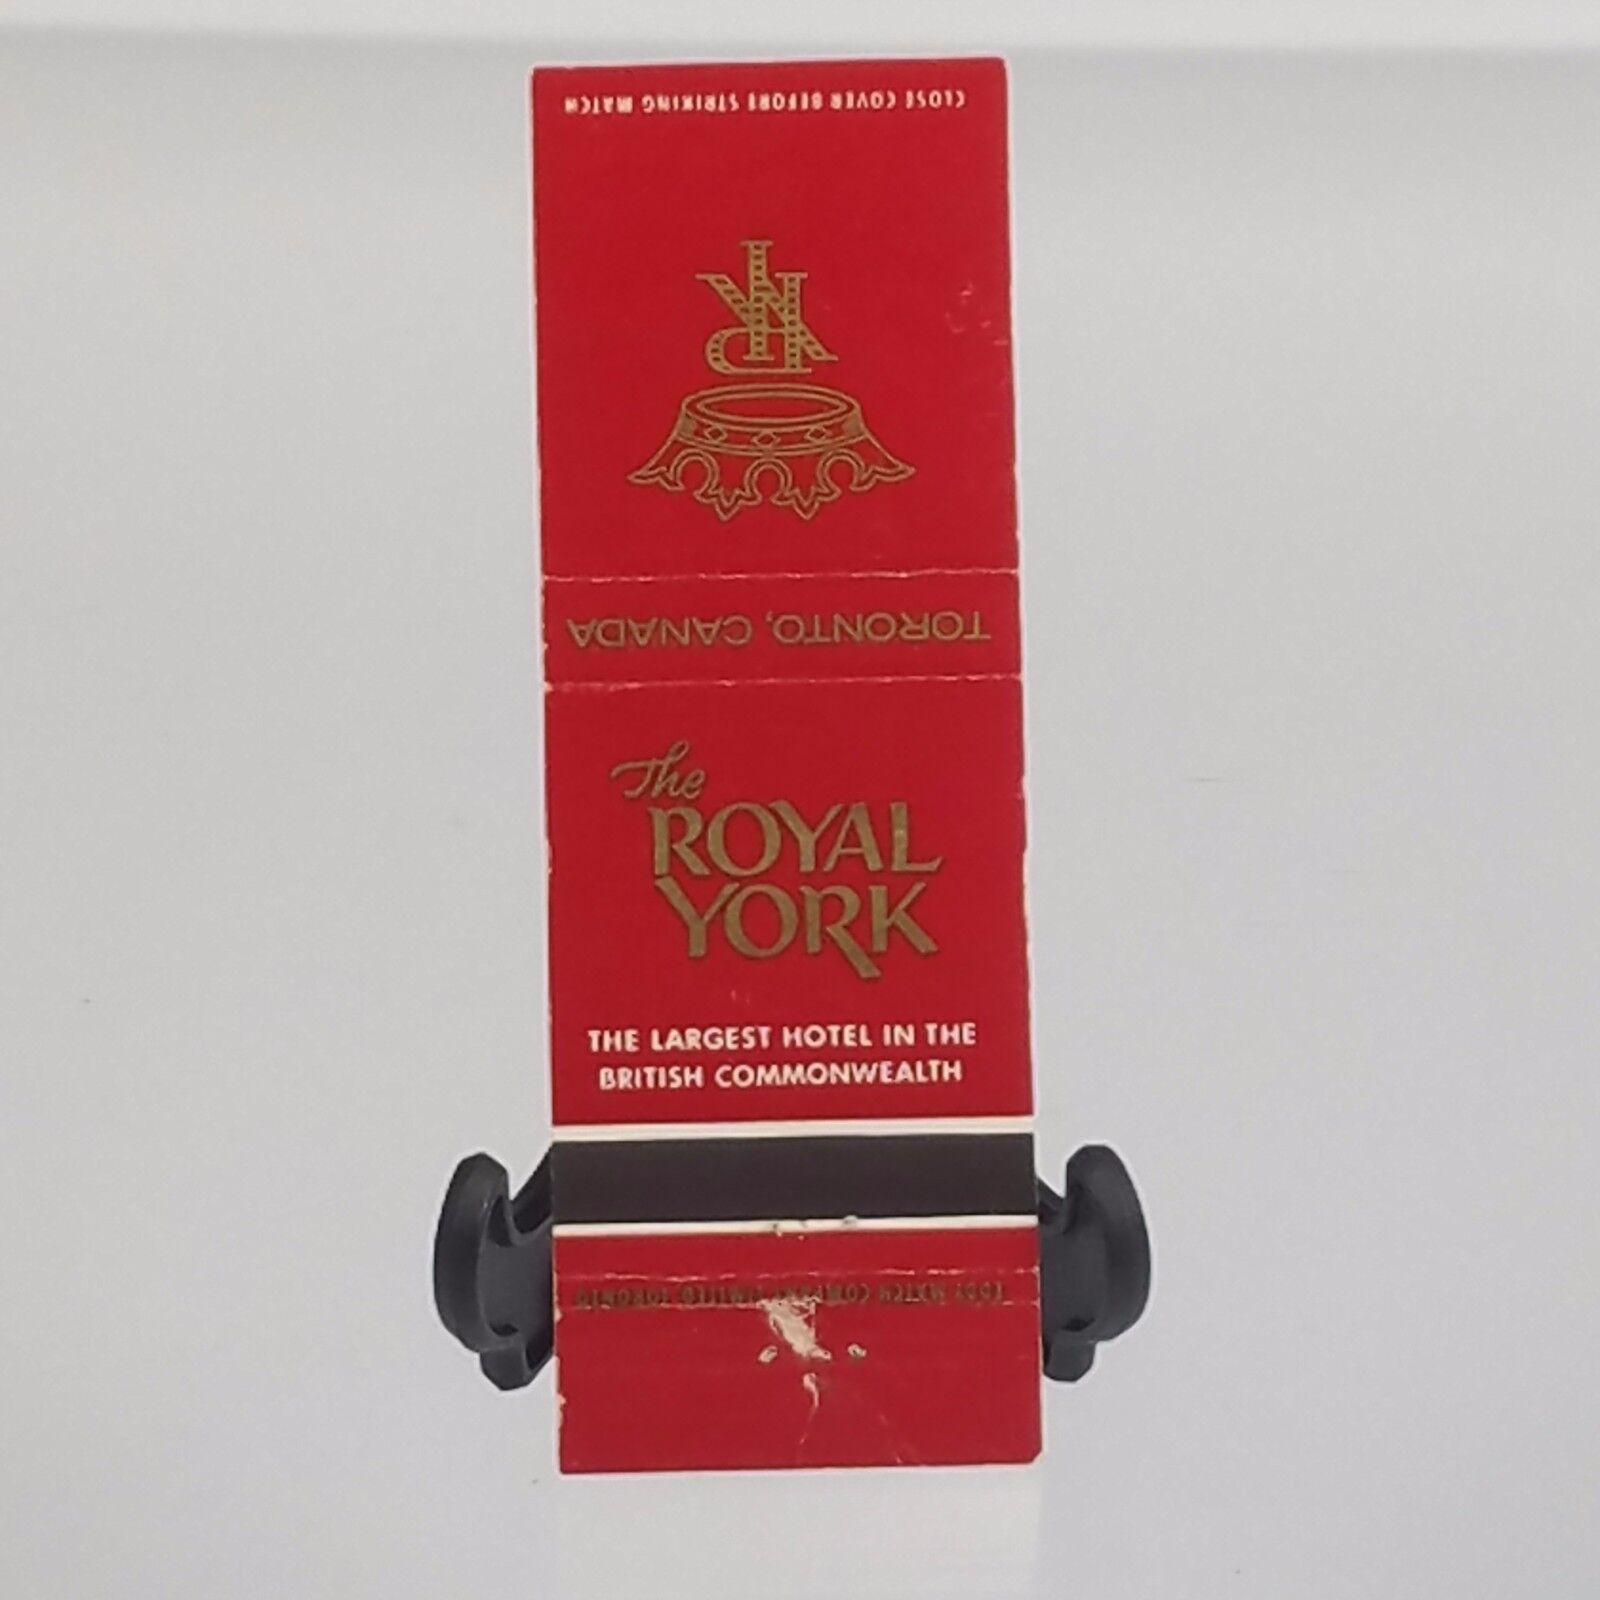 The Royal York Hotel Toronto Canada Vintage Matchbook Cover 